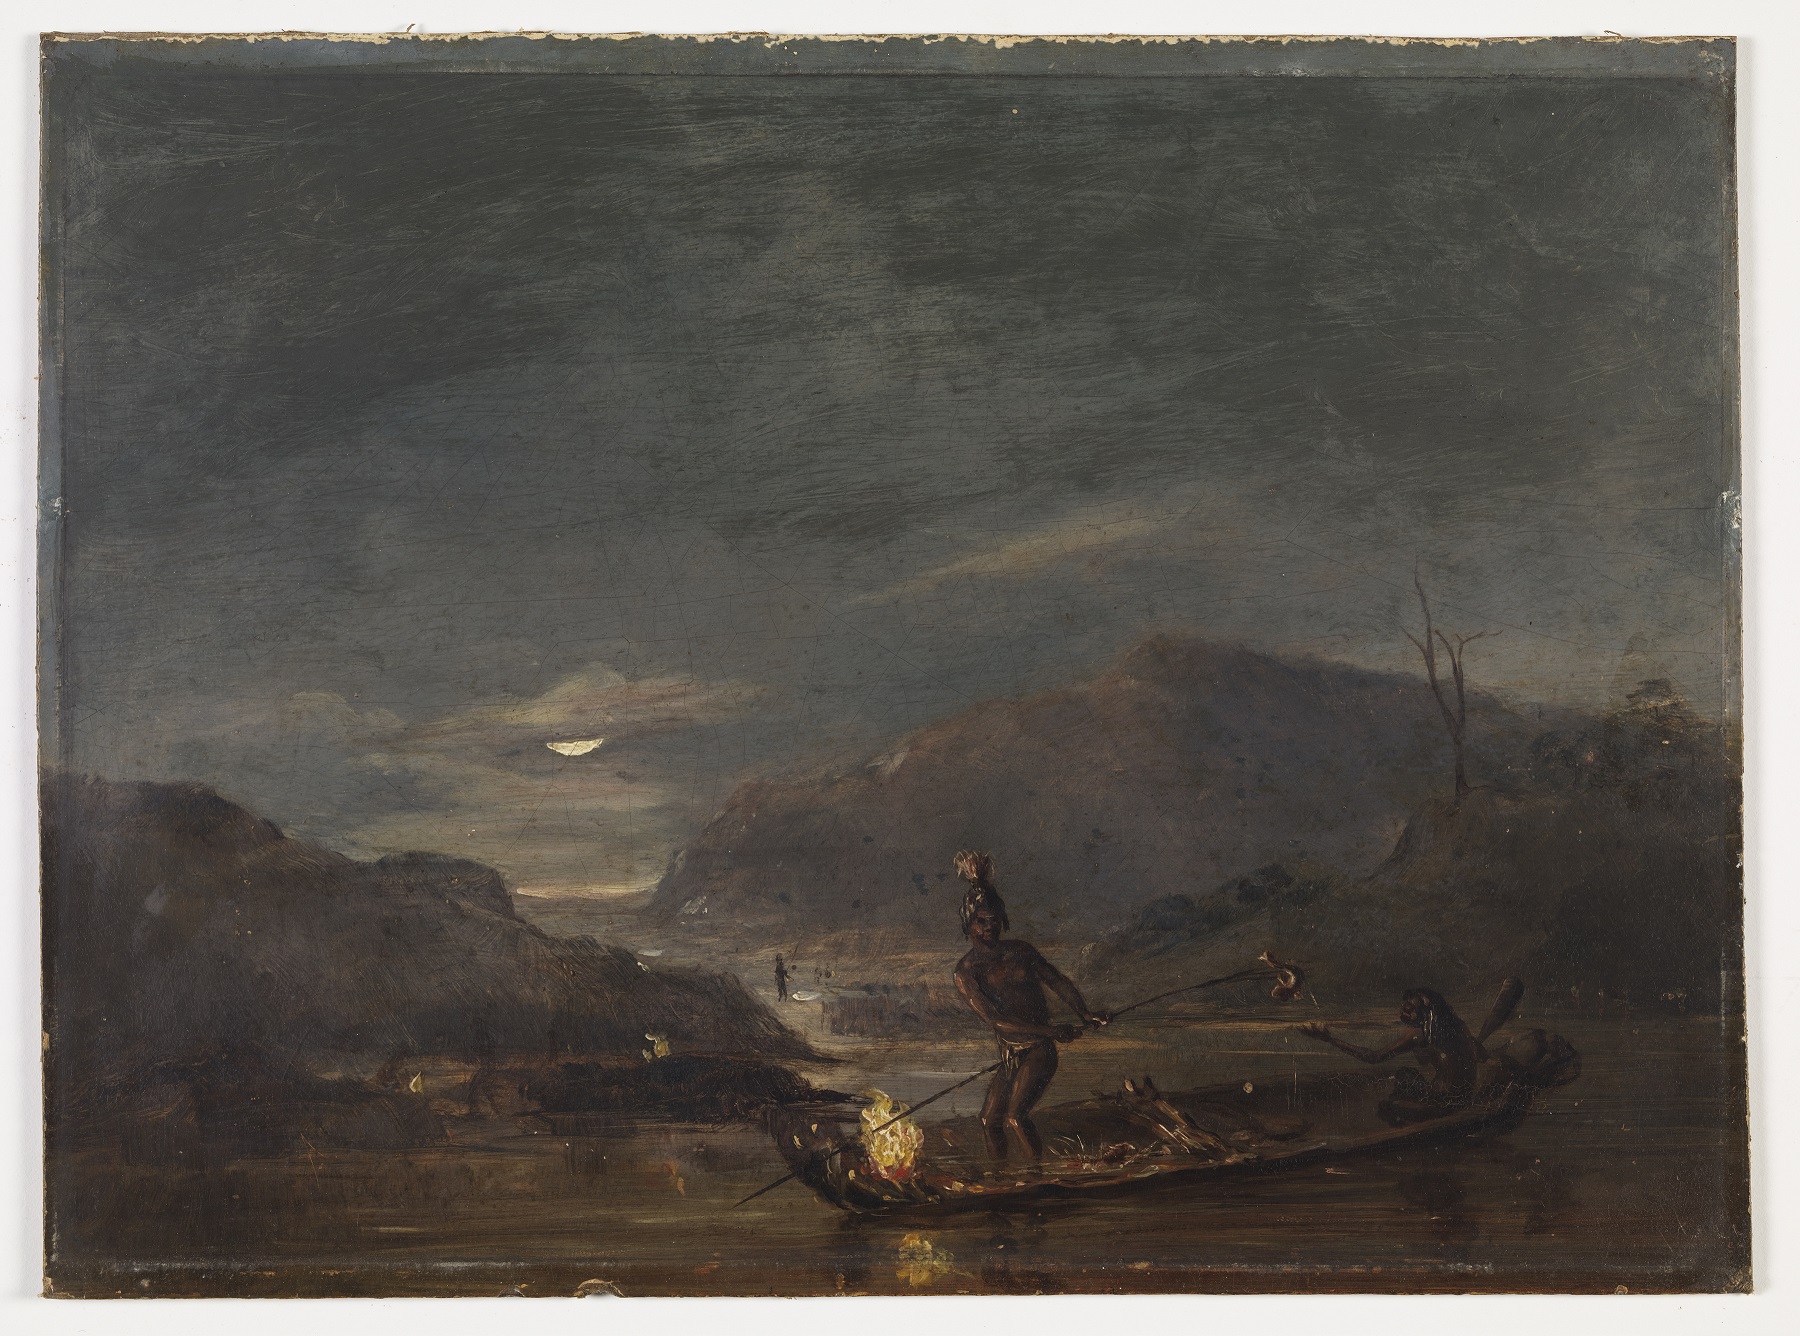 A group of Aboriginal Australians fishing, in an unknown location, at night.